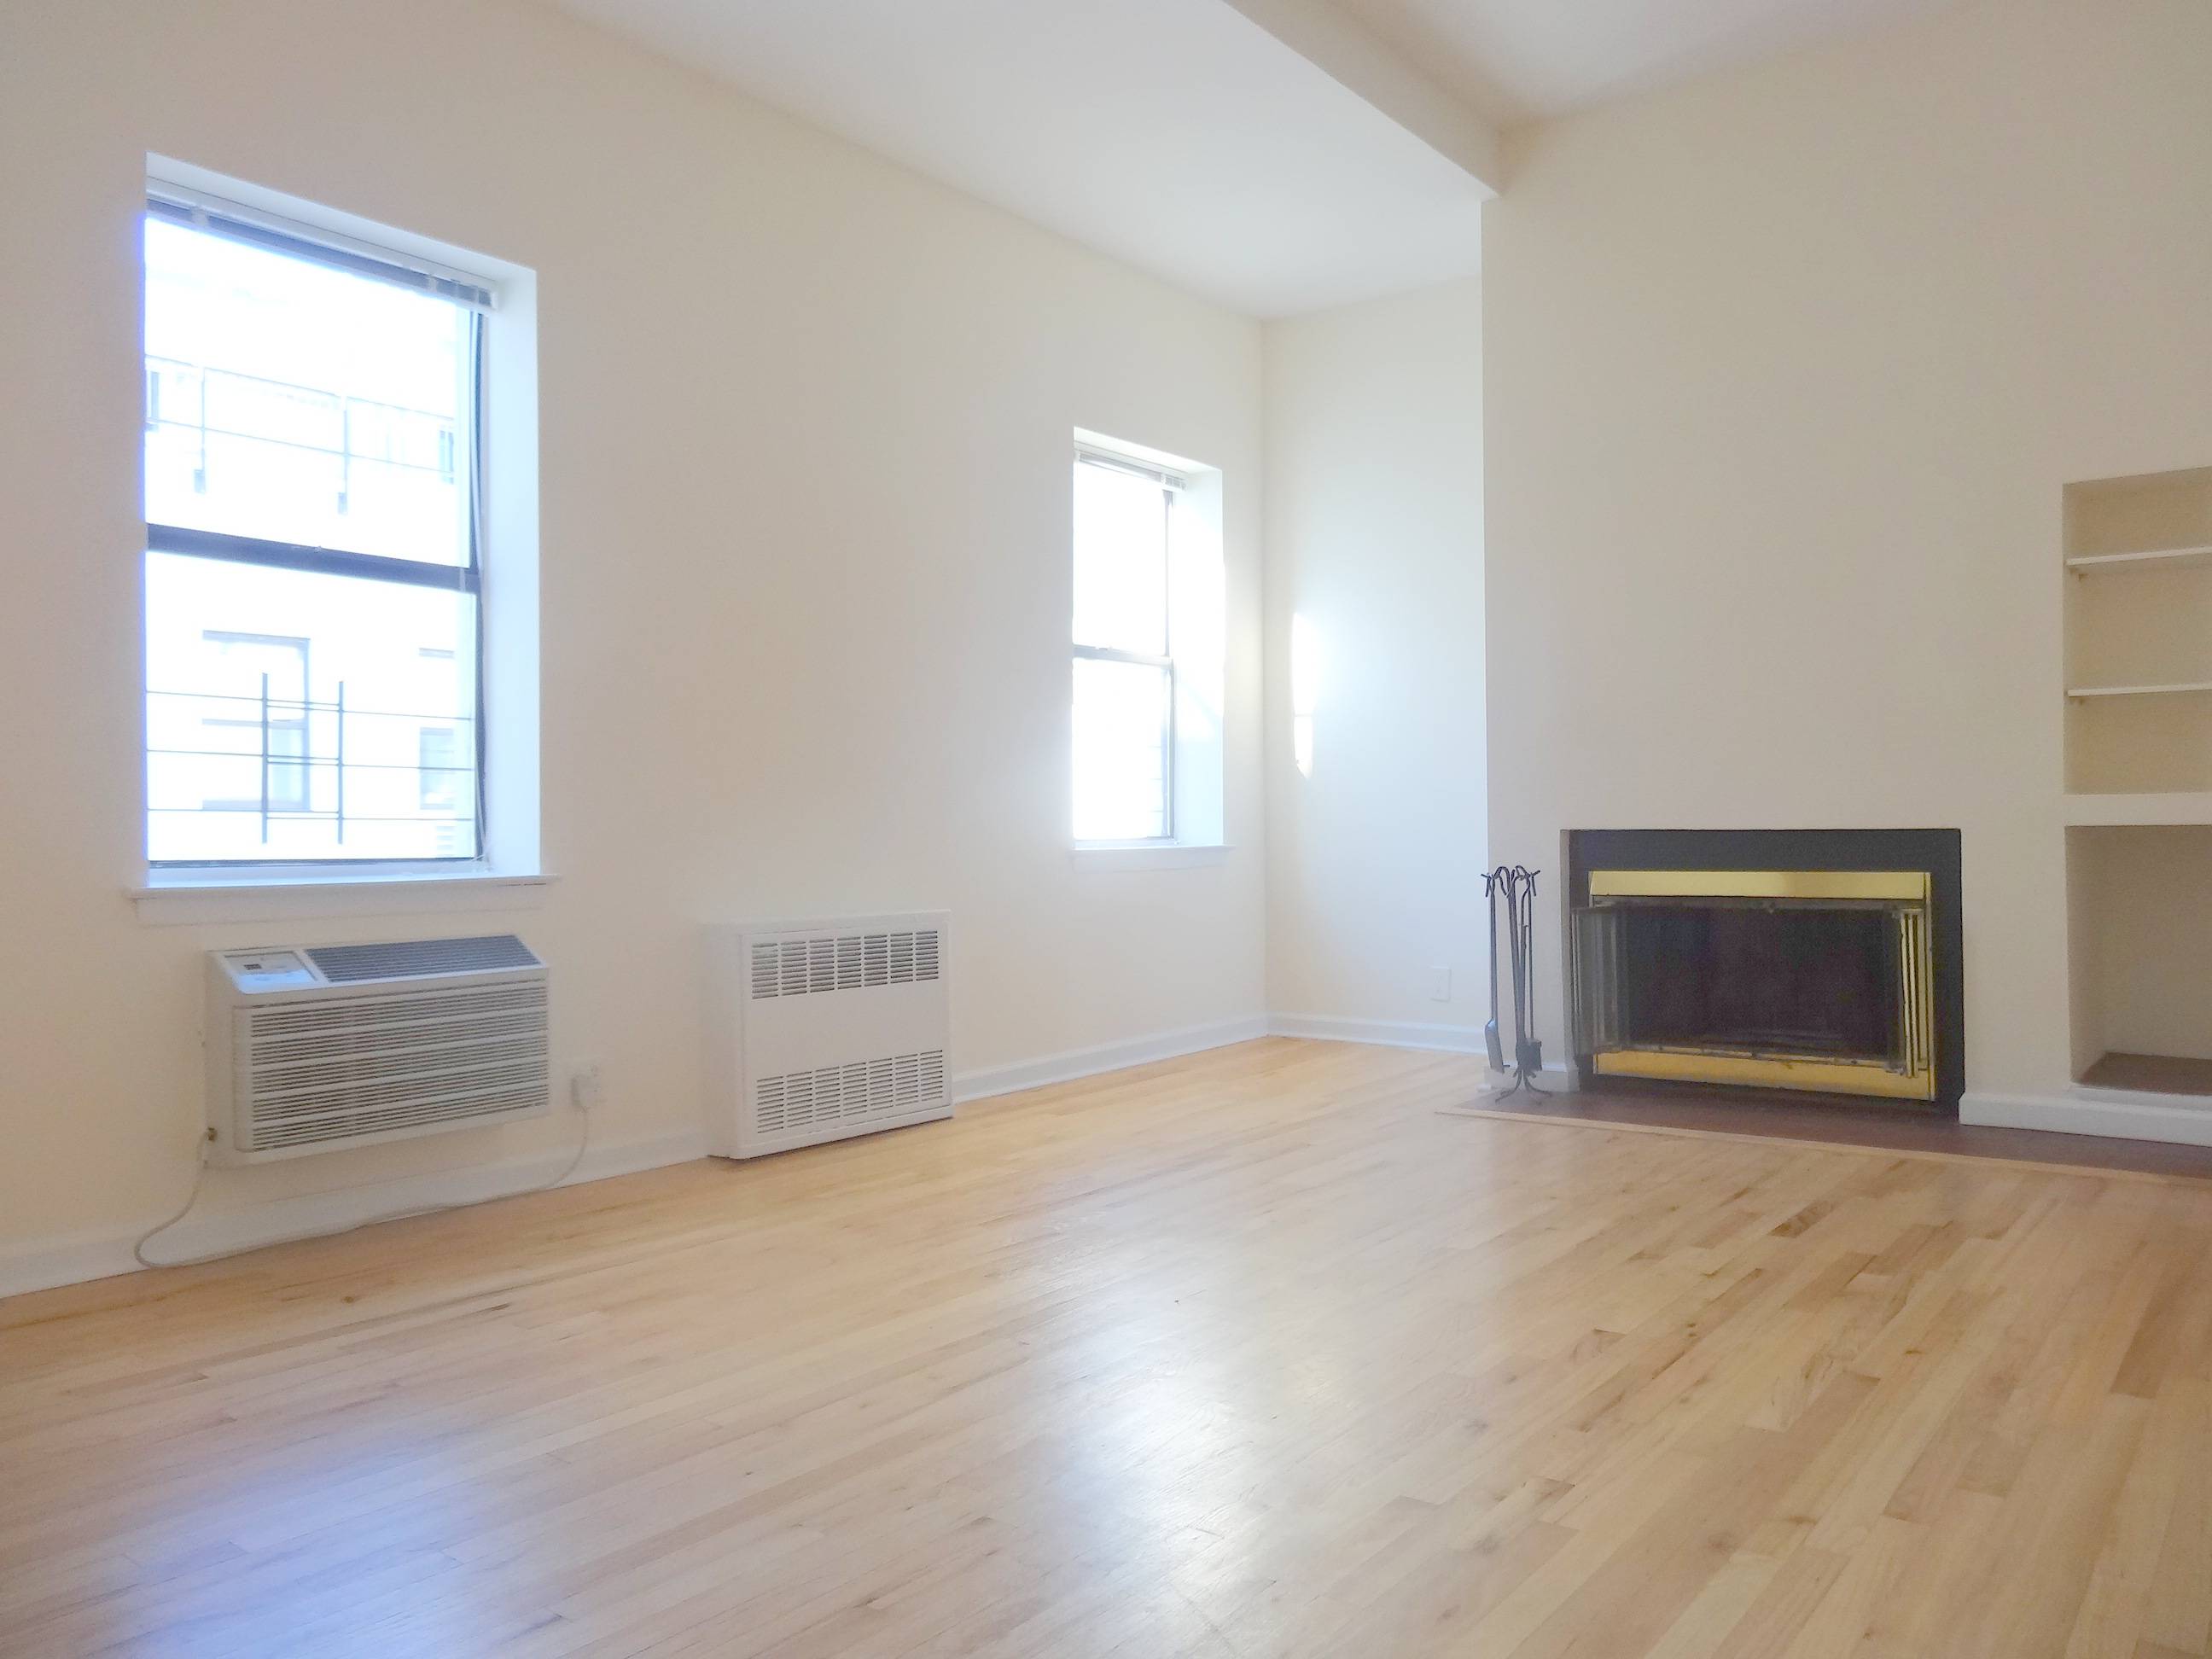 Penthouse Living | 2BR/1.5BA | East Village | Duplex | Outdoor Space | Dining Alcove